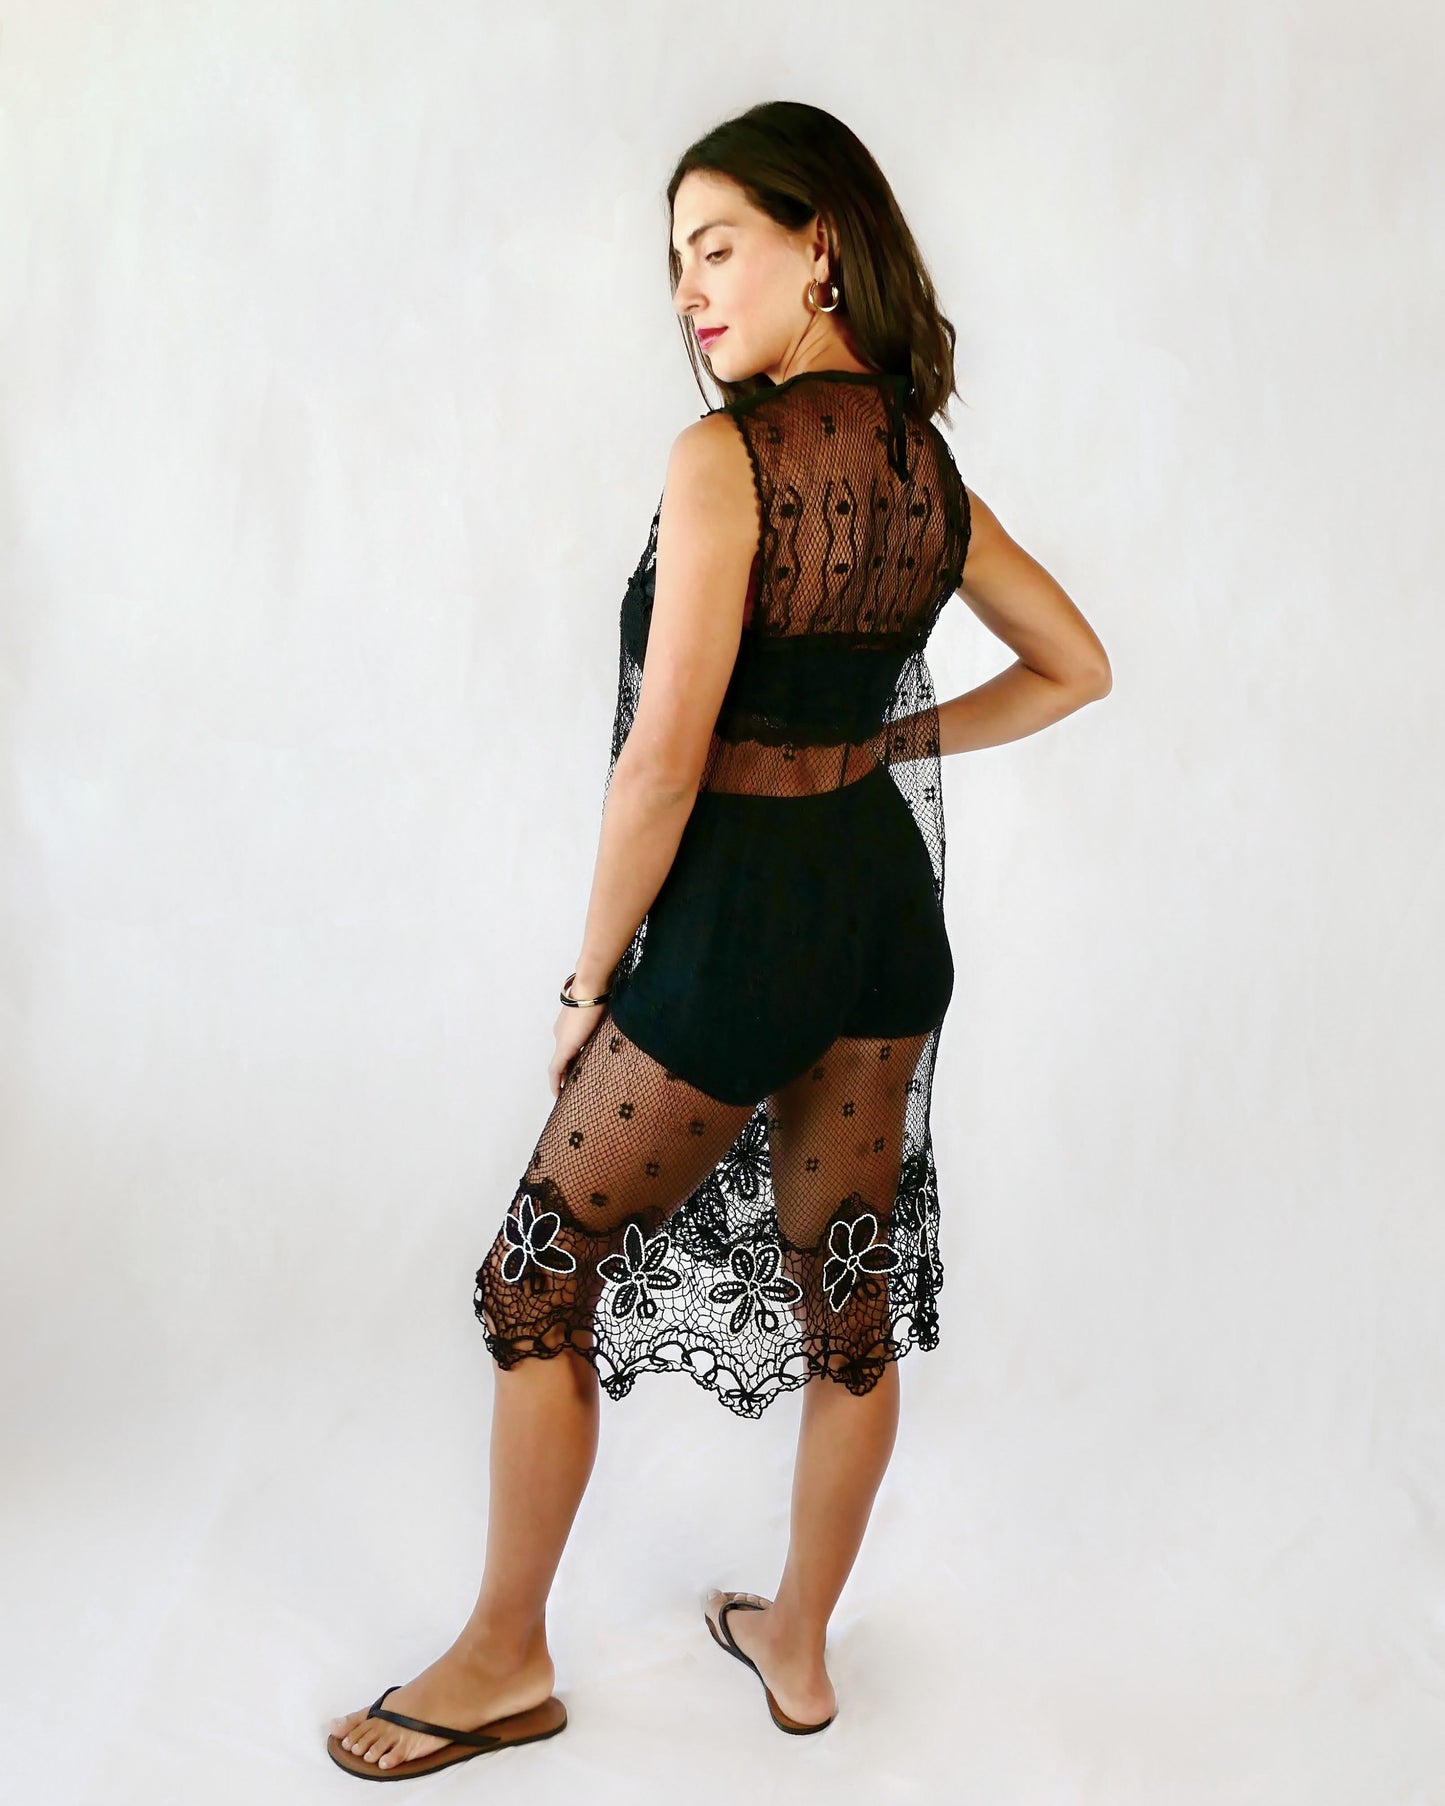 Sheer Crochet Coverup with Black and White Daisies at the Hem